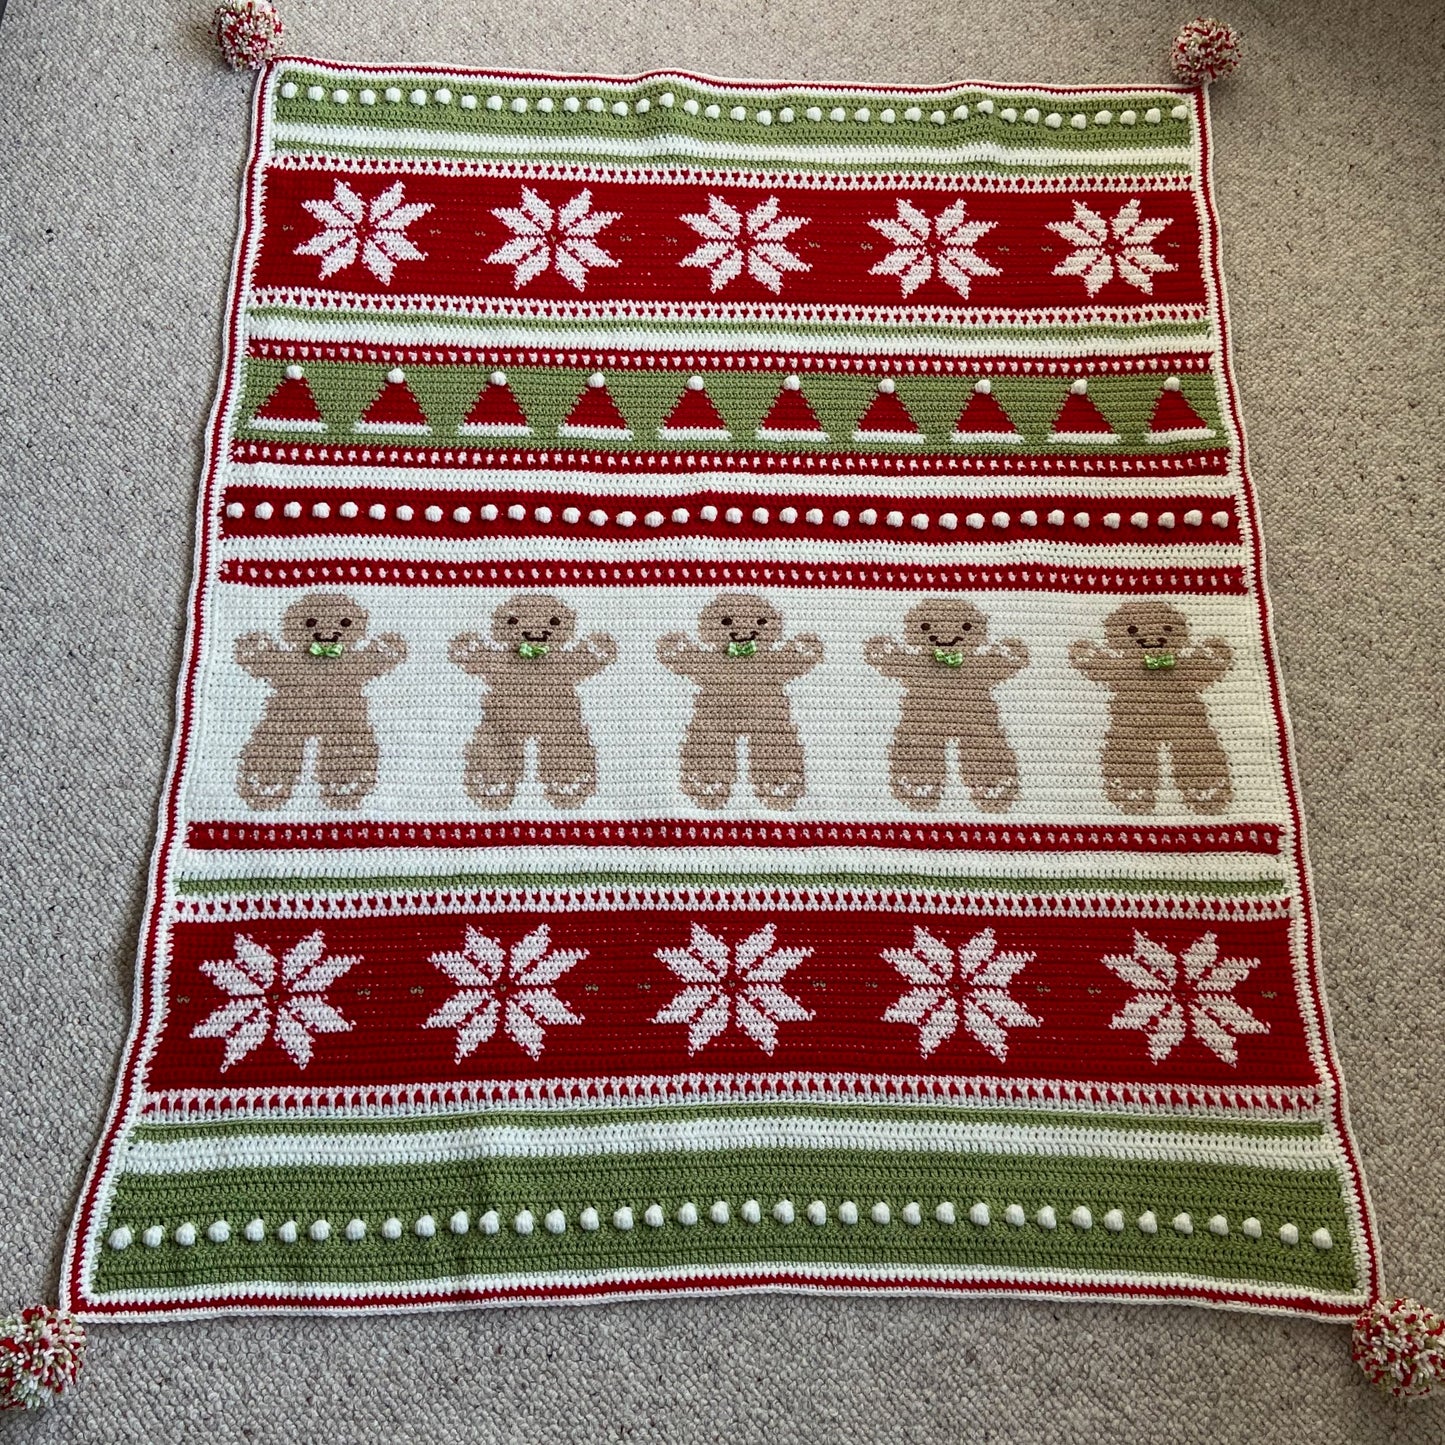 CROCHET A LONG - Christmas Eve Wishes - Made by Anita - Blanket pack with downloadable pattern!